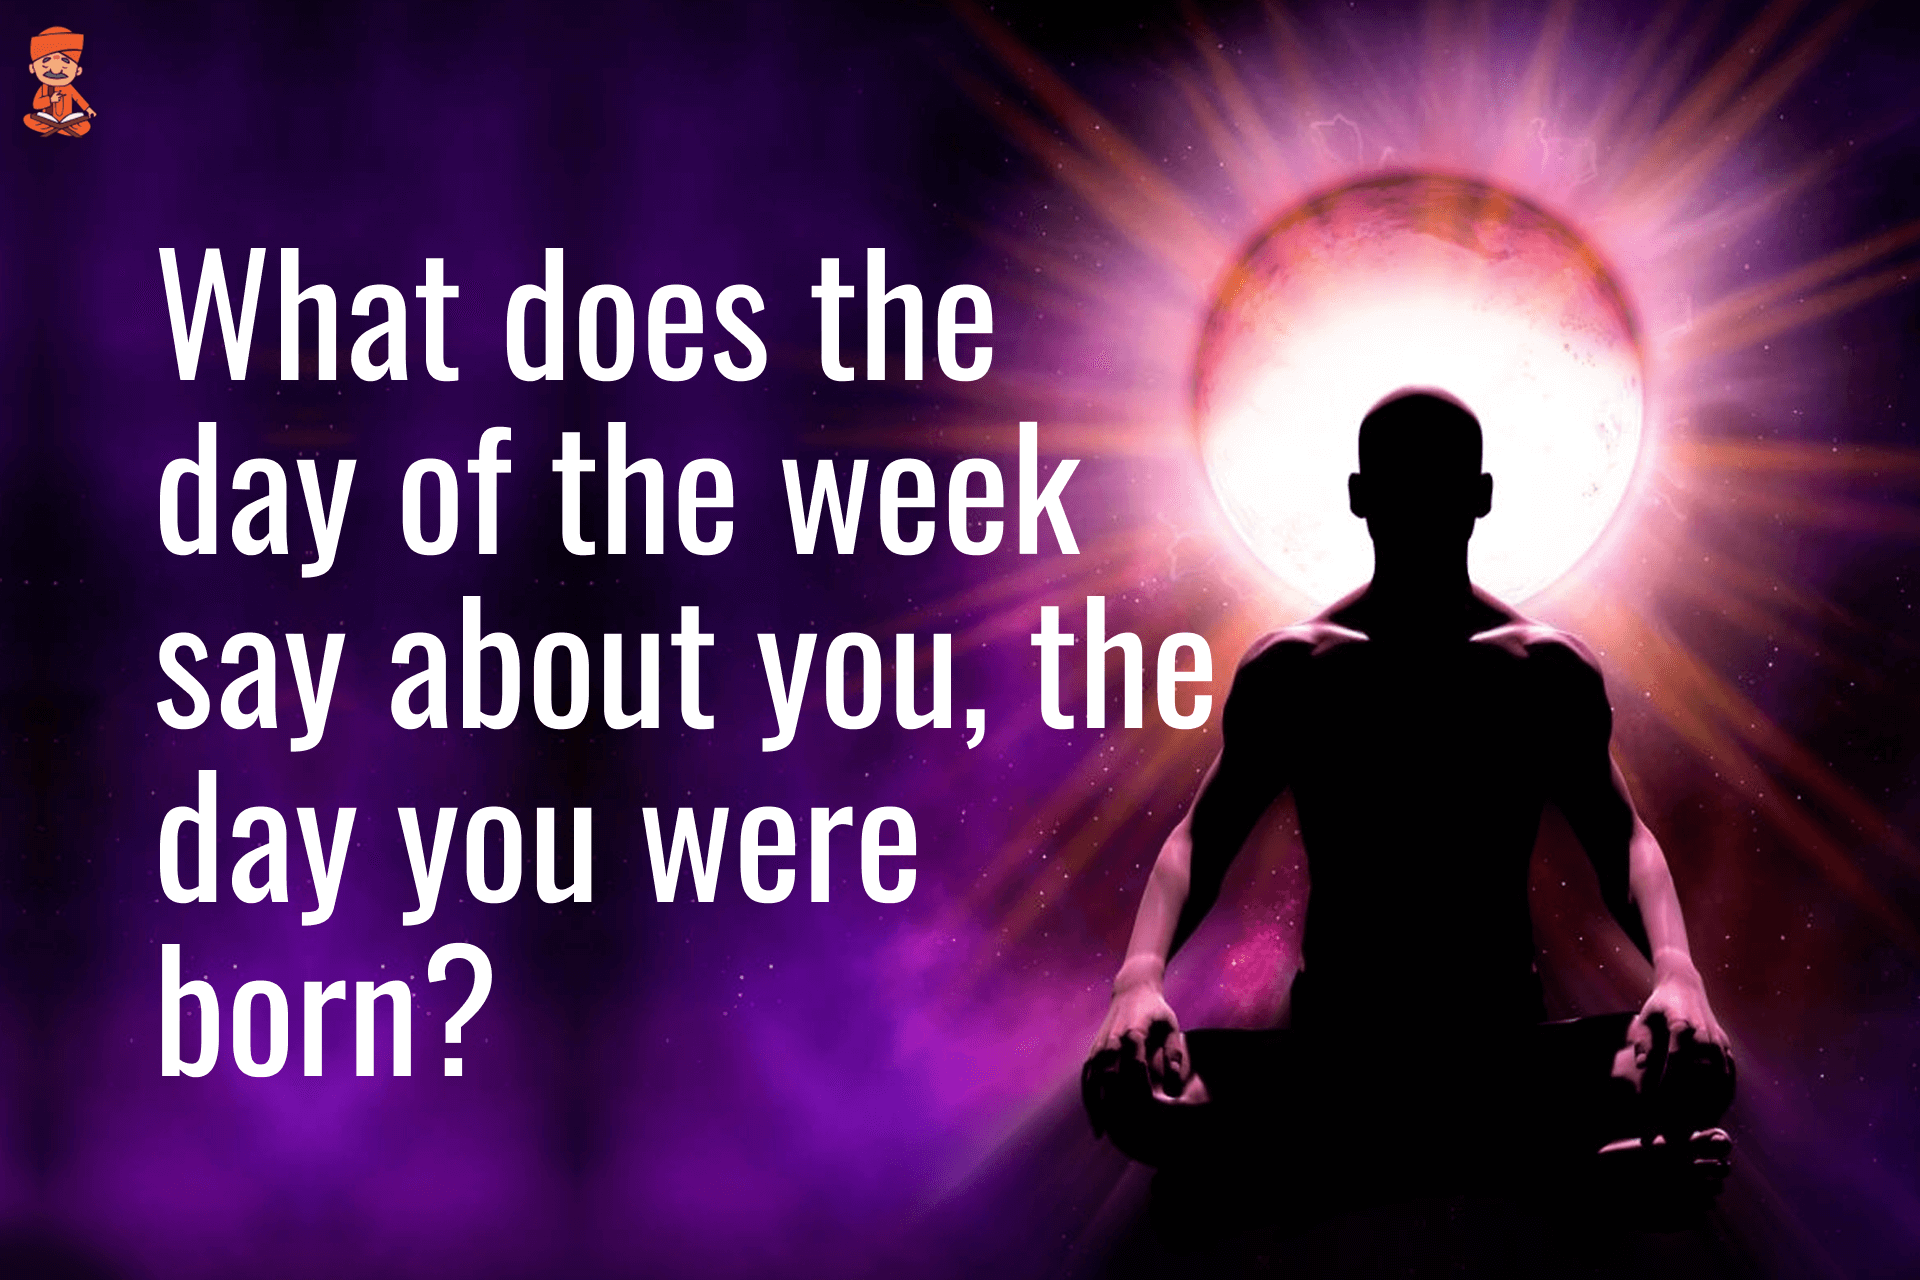 What Does The Day Of The Week Say About You, The Day You Were Born?